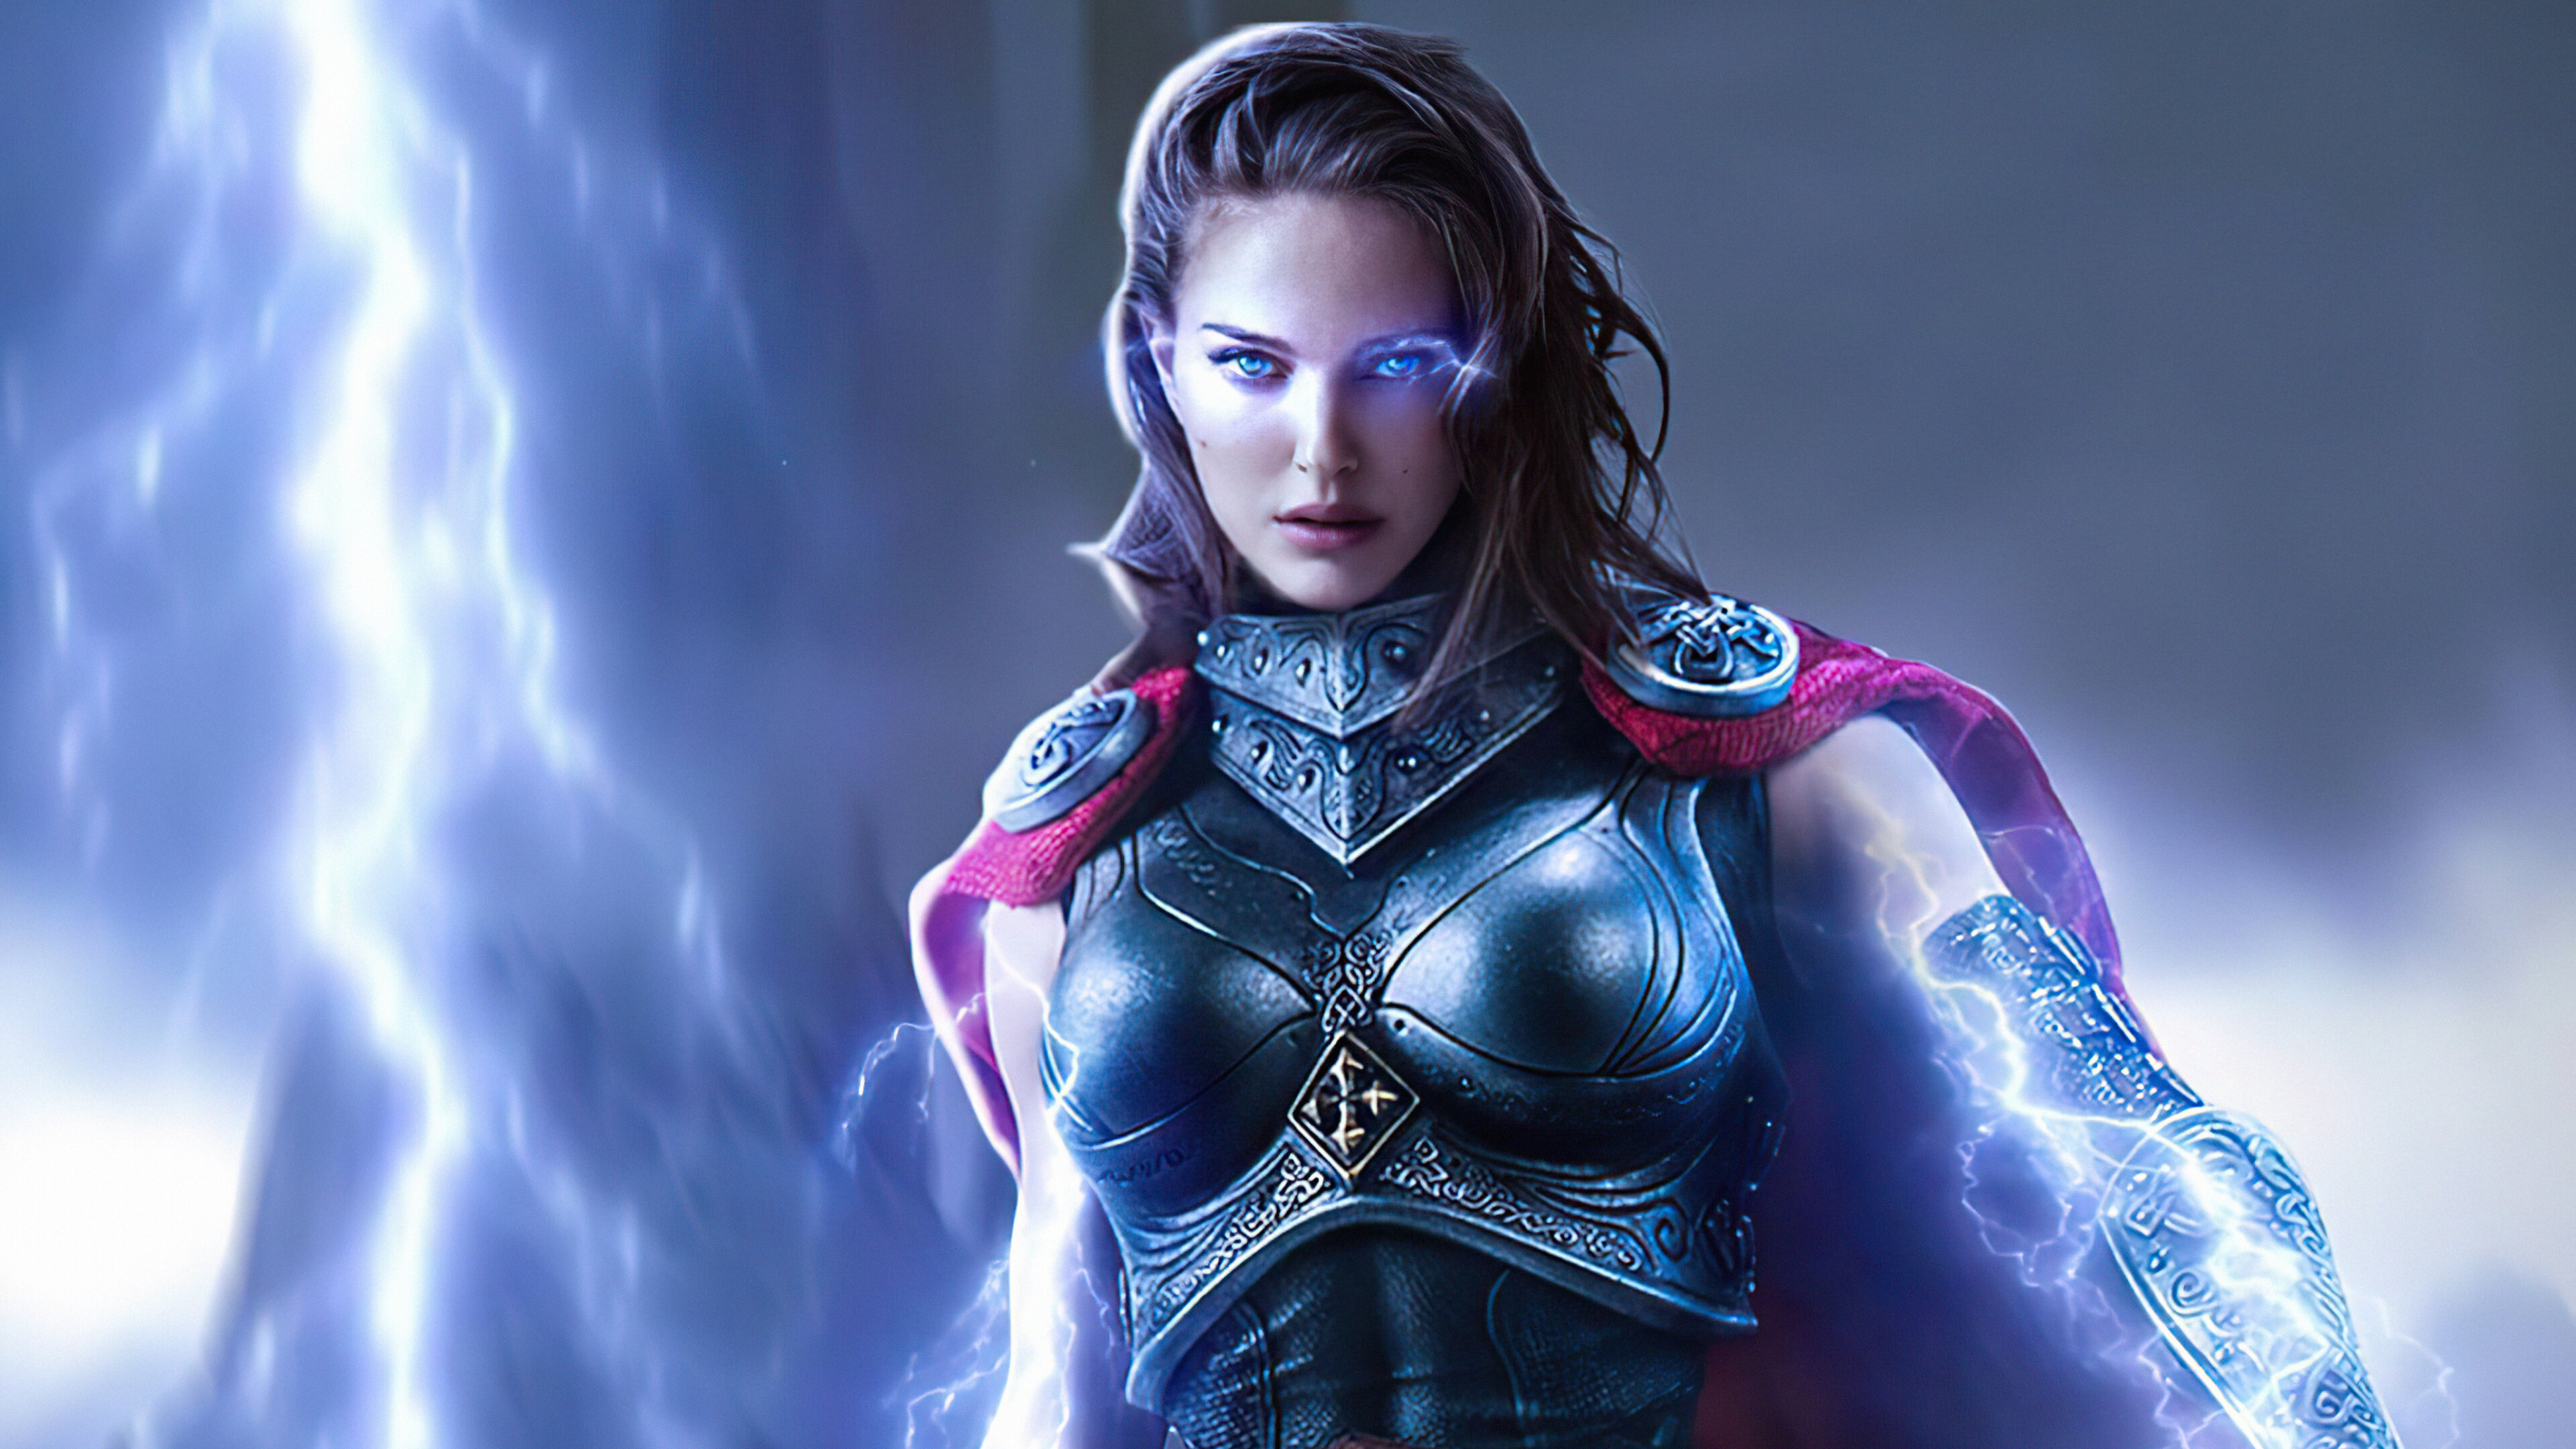 Thor: Love and Thunder: Jane Foster, Portman's performance, Fictional character. 3840x2160 4K Wallpaper.